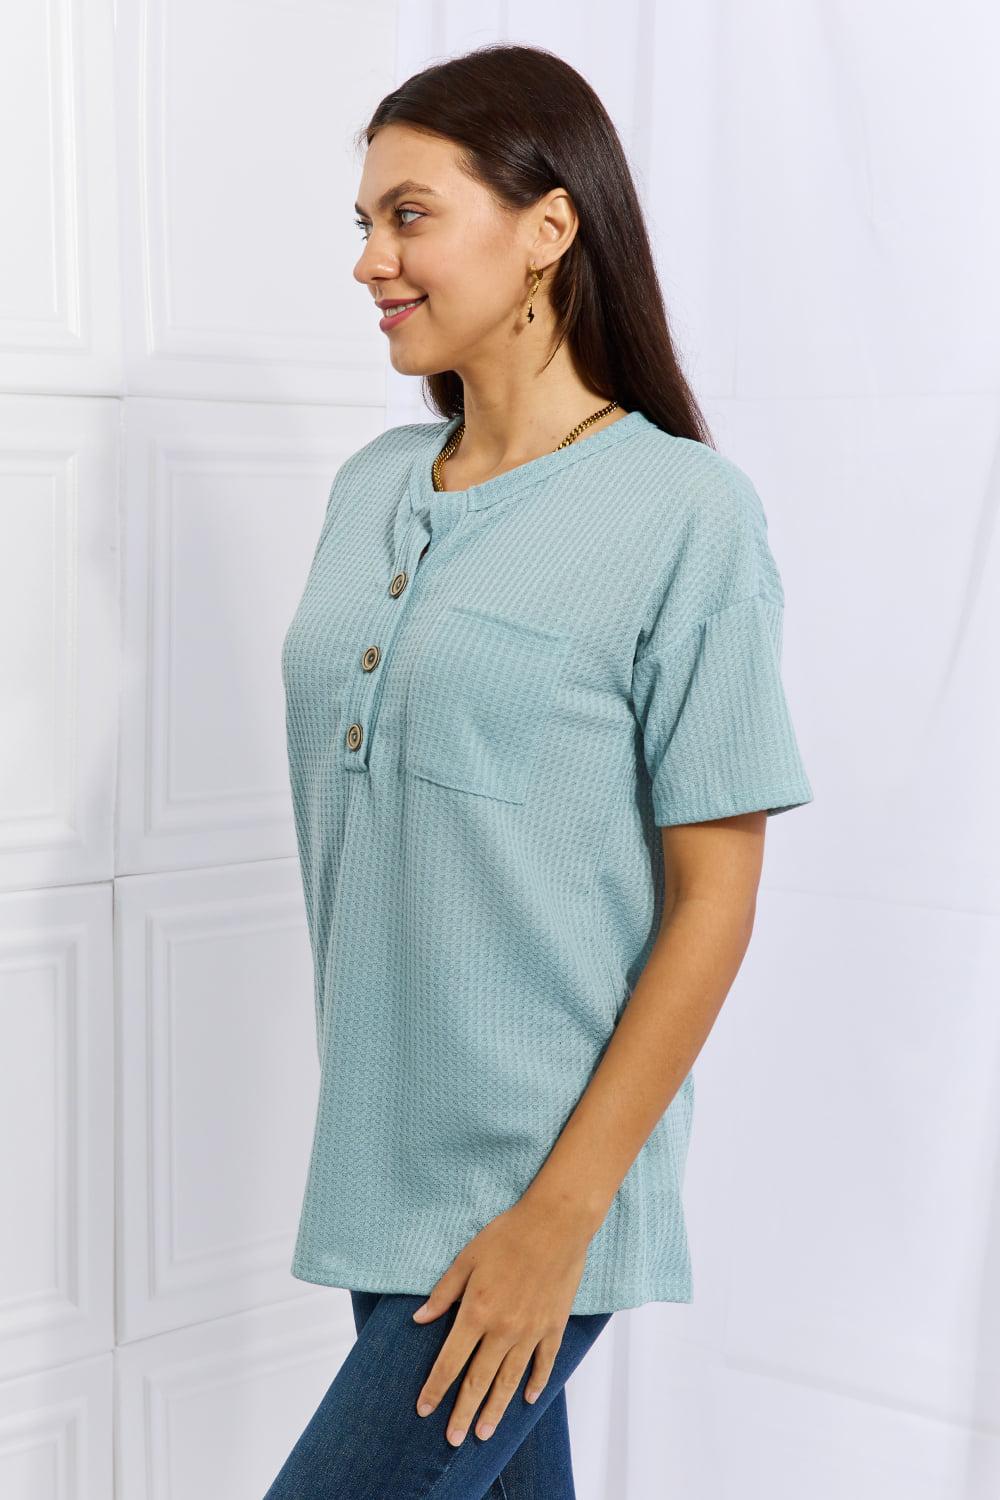 Heimish Made For You Full Size 1/4 Button Down Waffle Top in Blue BLUE ZONE PLANET